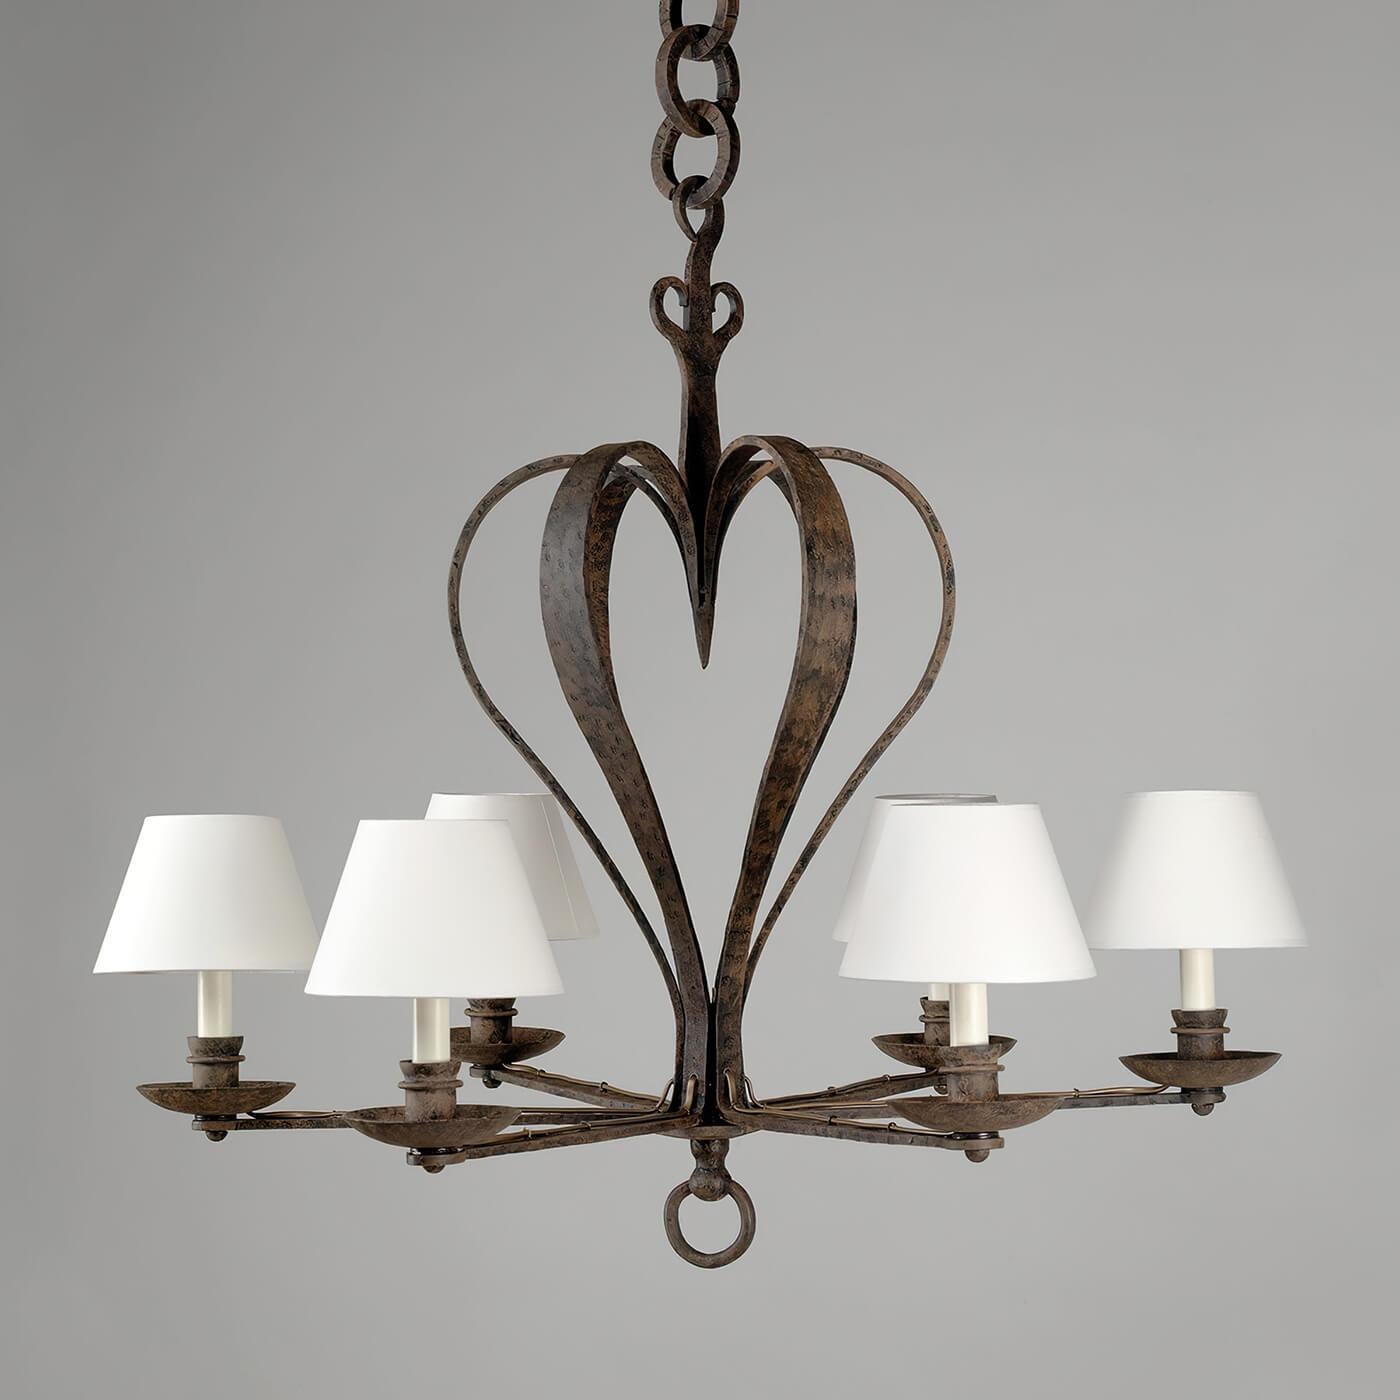 Rustic French Bastille Chandelier Based on an original discovered in a French market, the chandelier centers around a heart-shaped rustic body and is handcrafted in steel. The rust effect adds depth and gravitas.

Hand-formed from heavy-gauge